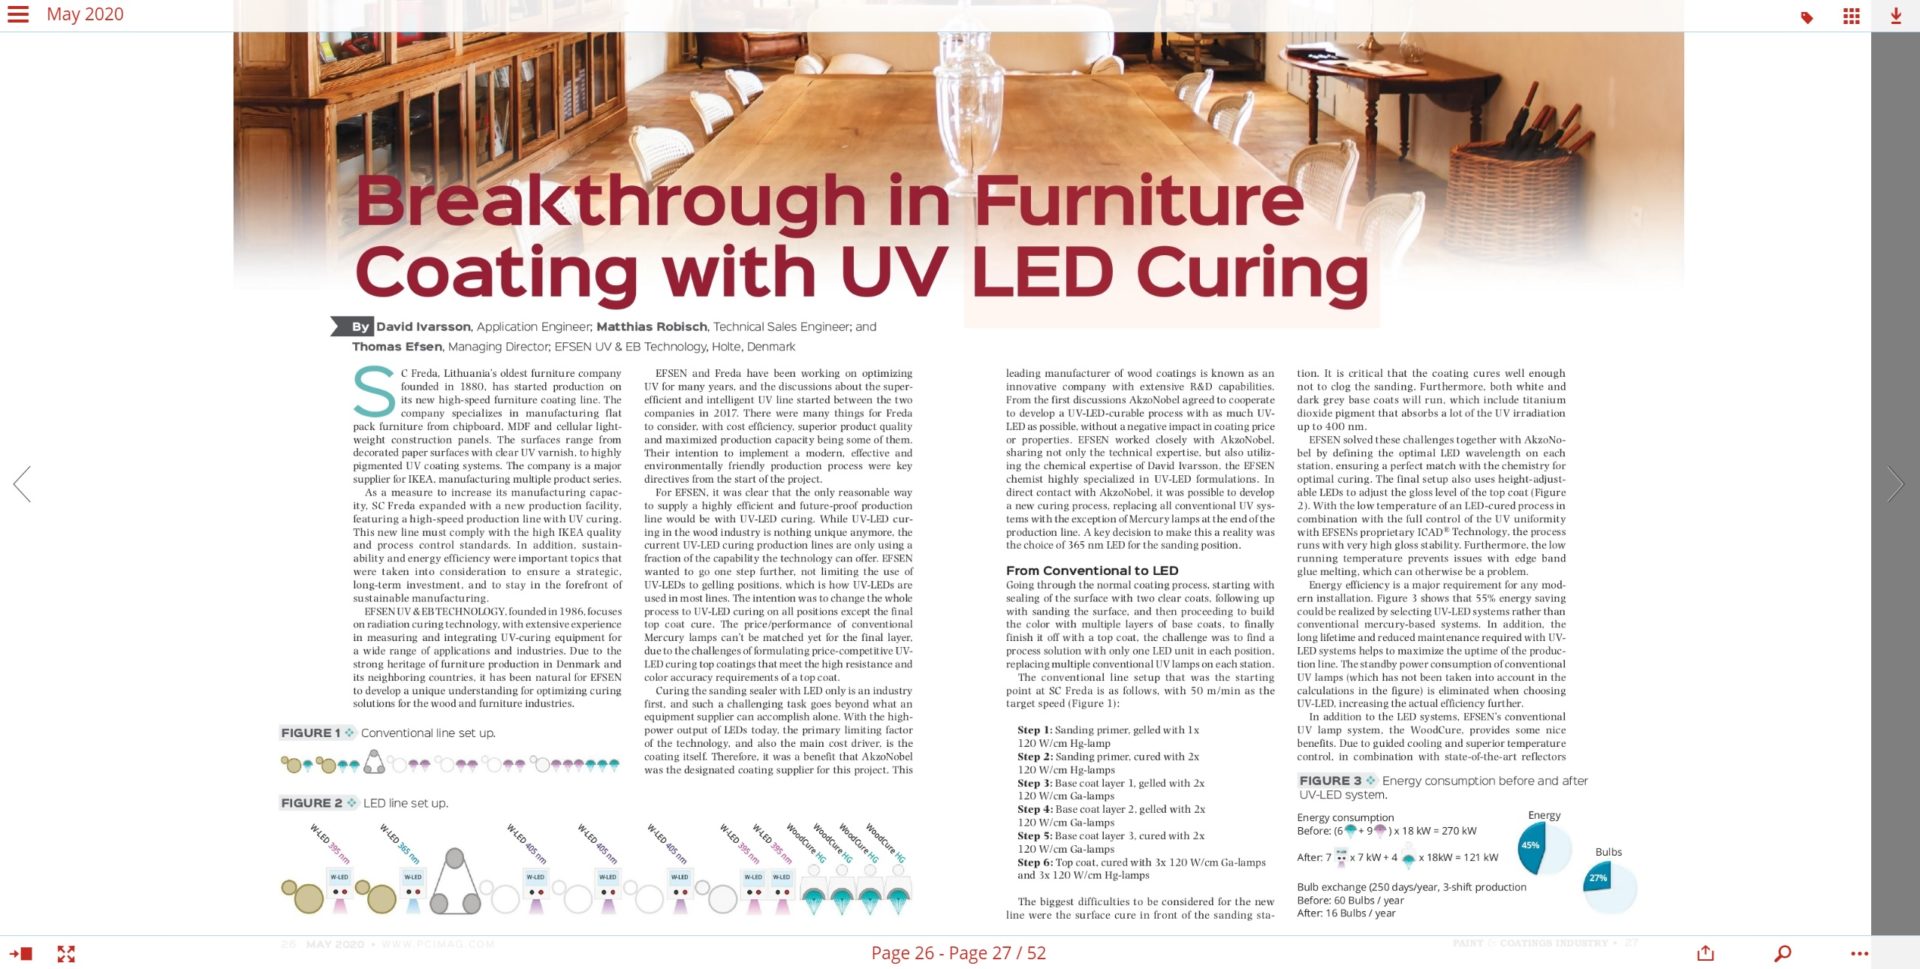 Breakthrough in Furniture Coating with UV LED Curing_PCI_May 2020_Page 26